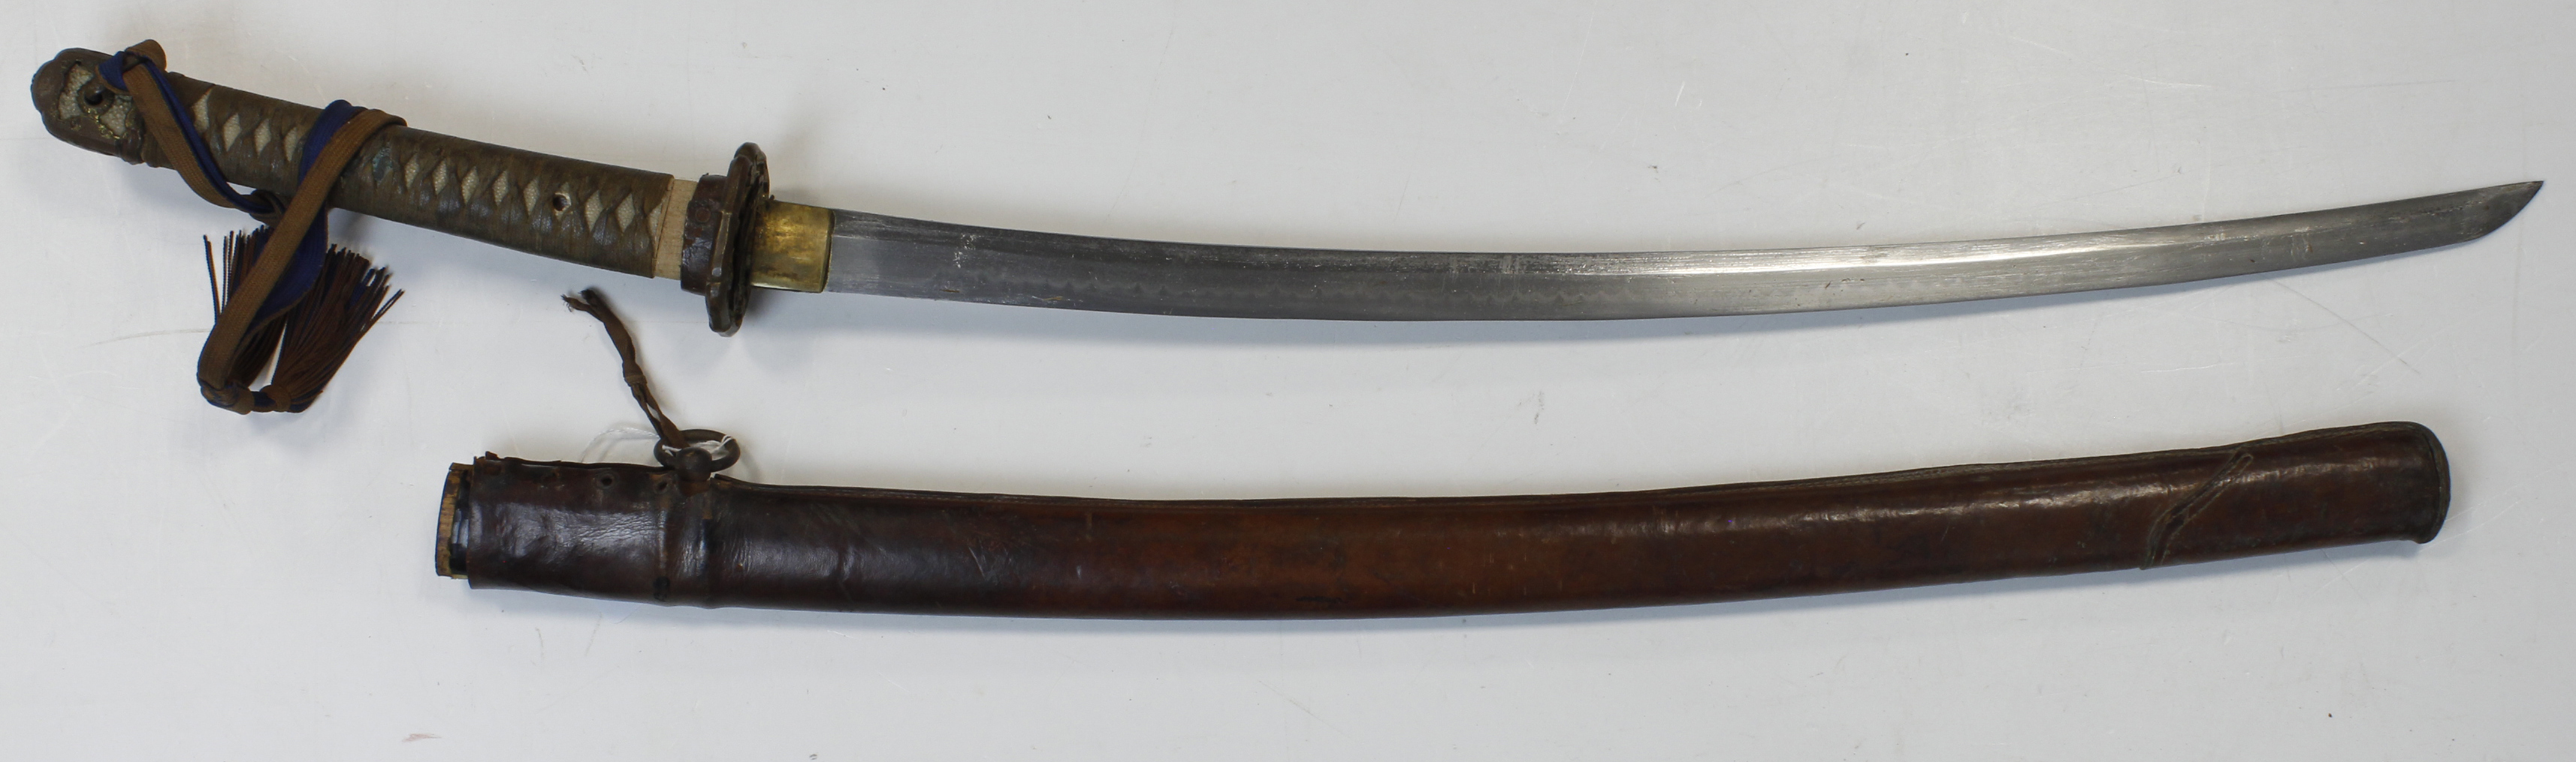 Japanese Sword with scabbard and leather cover, tang signed, blade approx 25"